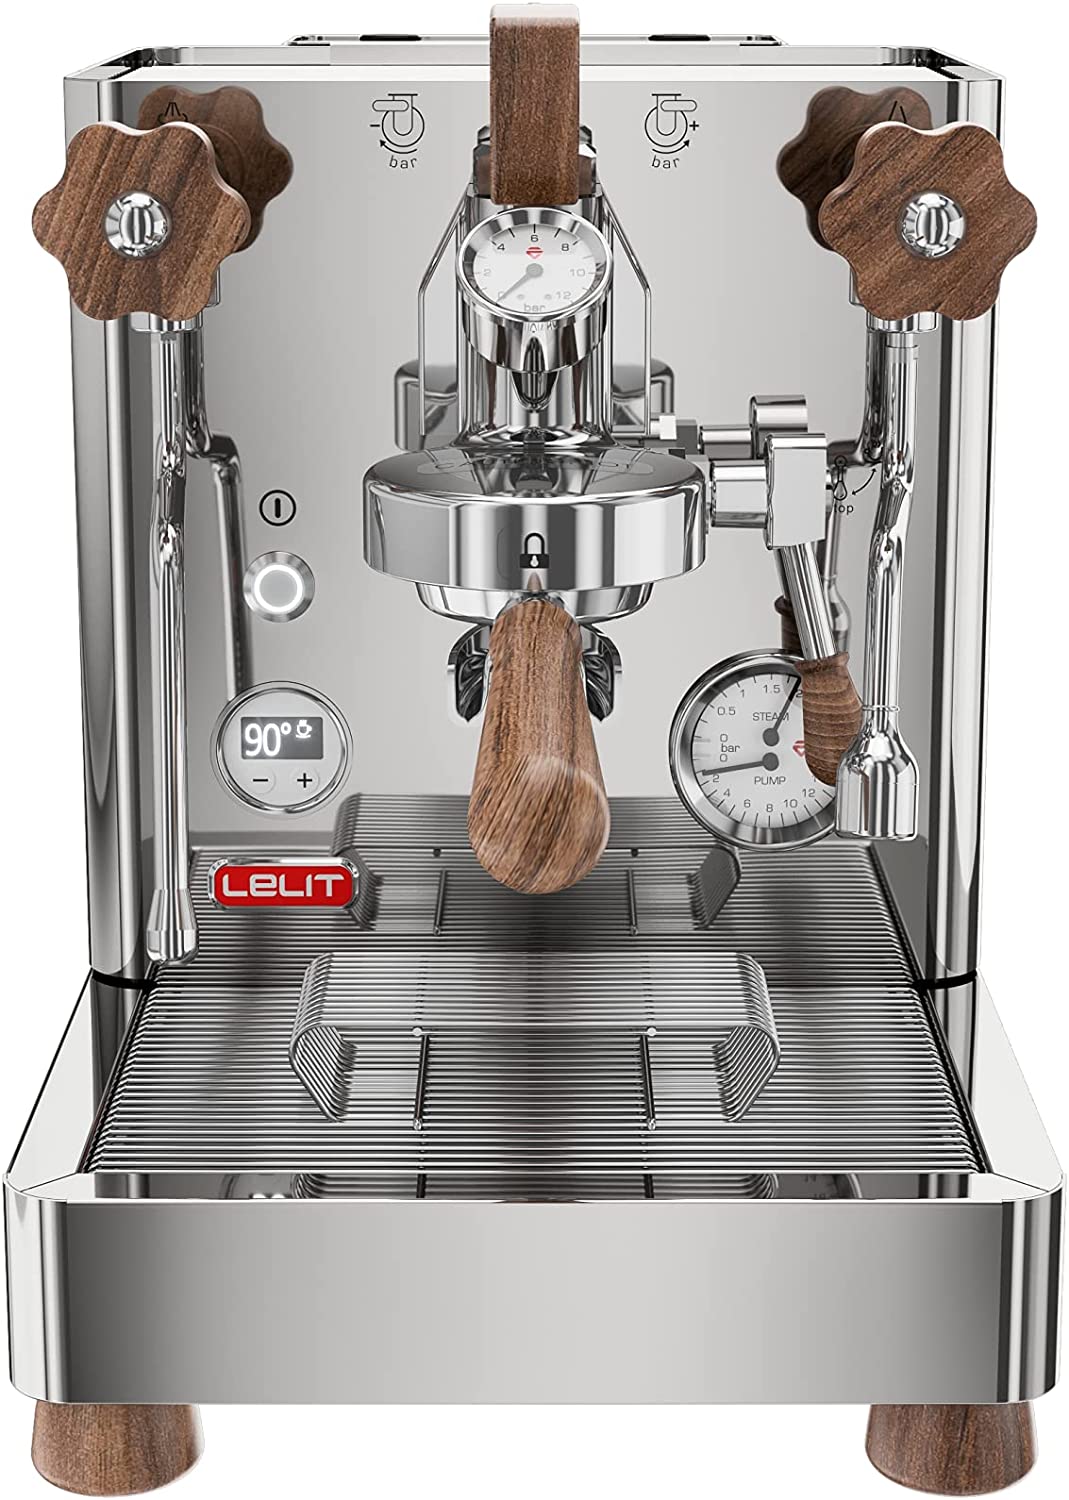 Lelit PL162T Bianca Professional Dual Boiler Coffee Machine with L58E Brewing Group, Paddle and LCC to Guide All Parameters, Stainless Steel, 2.5 Litres, Silver